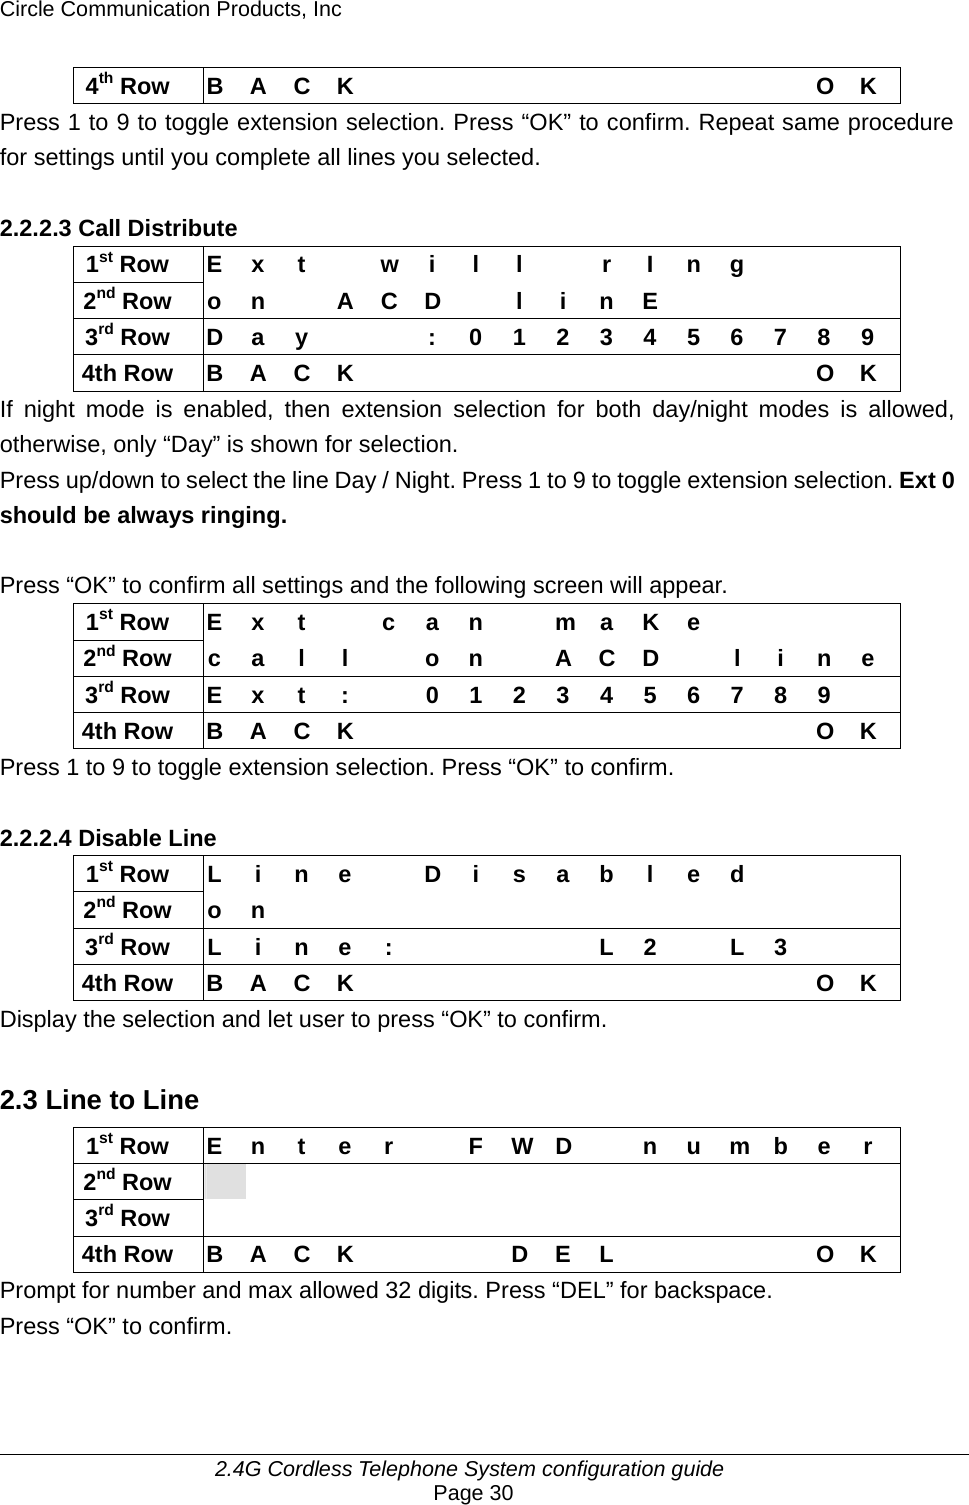 Circle Communication Products, Inc     2.4G Cordless Telephone System configuration guide Page 30 4th Row B A C K           O K Press 1 to 9 to toggle extension selection. Press “OK” to confirm. Repeat same procedure for settings until you complete all lines you selected.  2.2.2.3 Call Distribute 1st Row E x t   w i l l   r I n g      2nd Row o n  A C D  l i n E      3rd Row  D a y      : 0 1 2 3 4 5 6 7 8 9 4th Row B A C K           O K If night mode is enabled, then extension selection for both day/night modes is allowed, otherwise, only “Day” is shown for selection. Press up/down to select the line Day / Night. Press 1 to 9 to toggle extension selection. Ext 0 should be always ringing.    Press “OK” to confirm all settings and the following screen will appear. 1st Row E x t  c a n  m a K e     2nd Row c a l l  o n  A C D  l i n e 3rd Row  E x t  :    0 1 2 3 4 5 6 7 8 9   4th Row B A C K           O K Press 1 to 9 to toggle extension selection. Press “OK” to confirm.  2.2.2.4 Disable Line 1st Row  L i n e   D i s a b l e d      2nd Row o n               3rd Row  L  i n e :          L 2    L 3     4th Row B A C K           O K Display the selection and let user to press “OK” to confirm.  2.3 Line to Line 1st Row  E n t e r   F W D   n u m b e r 2nd Row                  3rd Row                 4th Row  B A C K        D E L          O K Prompt for number and max allowed 32 digits. Press “DEL” for backspace. Press “OK” to confirm.  